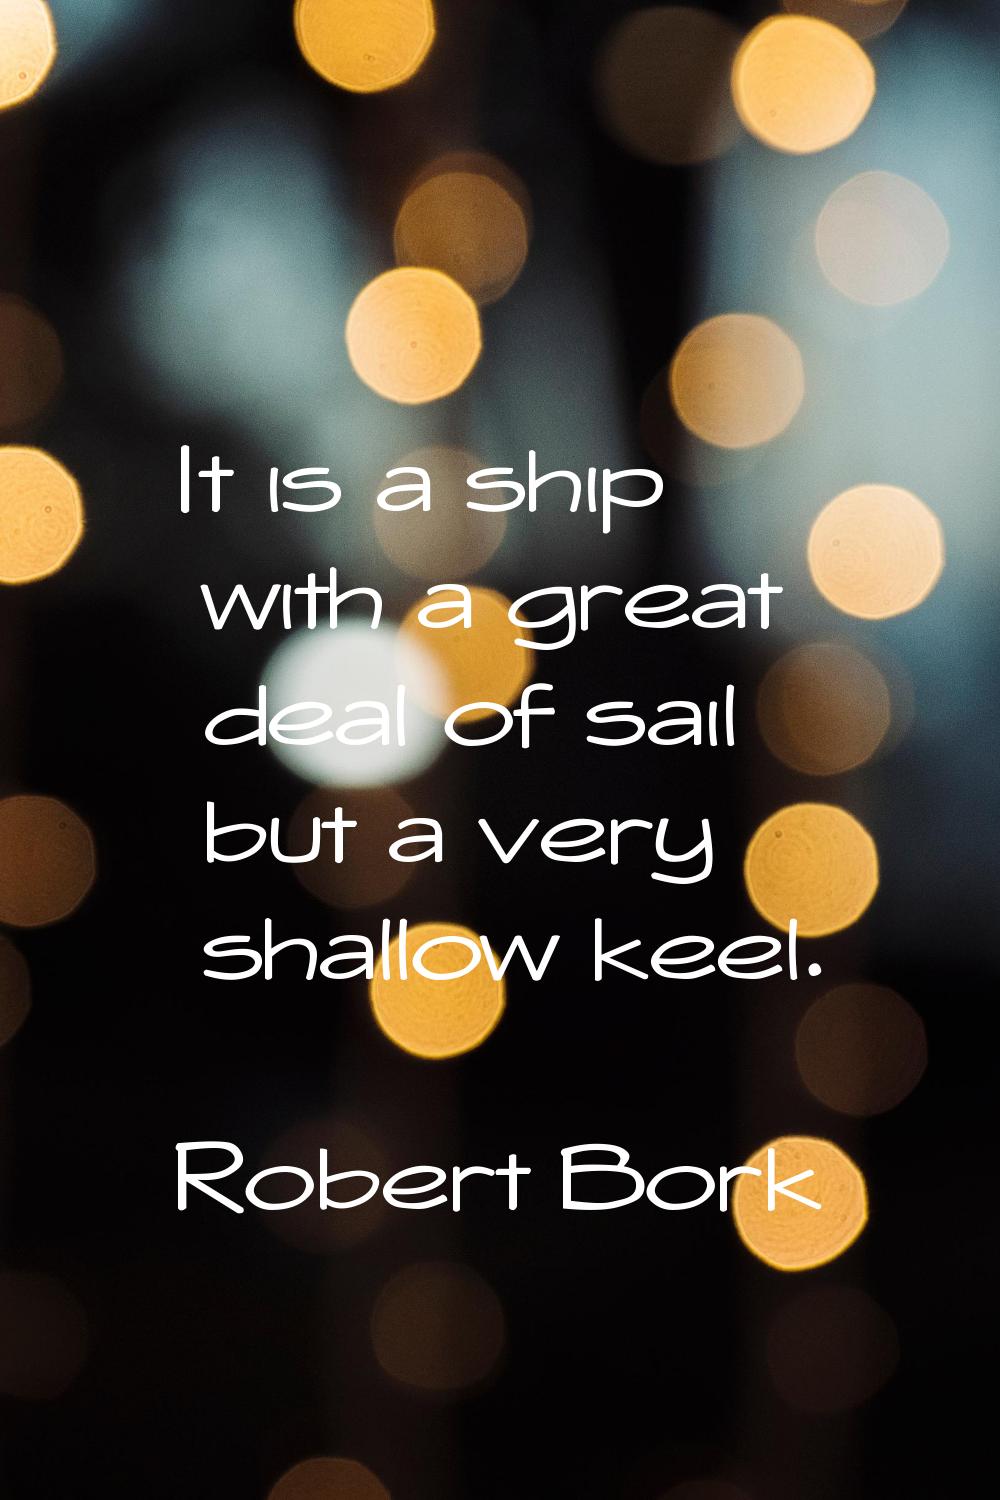 It is a ship with a great deal of sail but a very shallow keel.